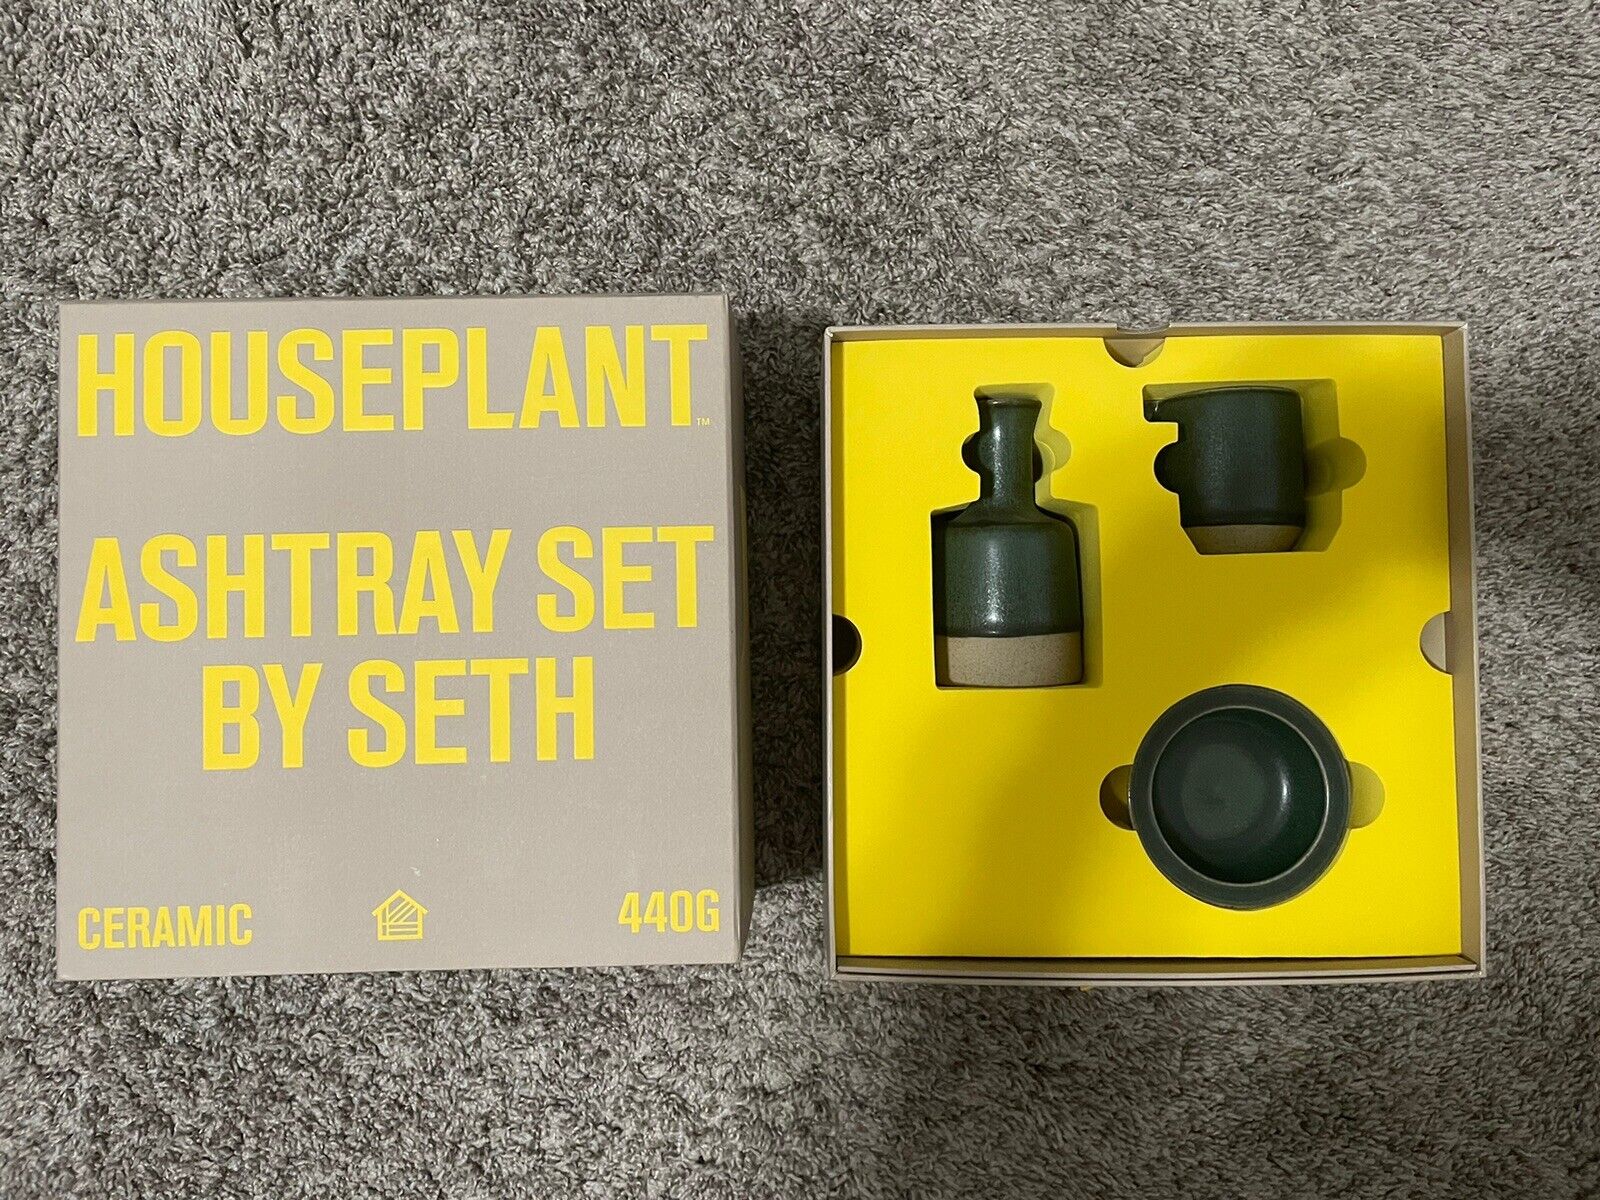 Houseplant Ashtray Set in Moss, Kitted - by Seth Rogen, Ceramic, 440G 2021